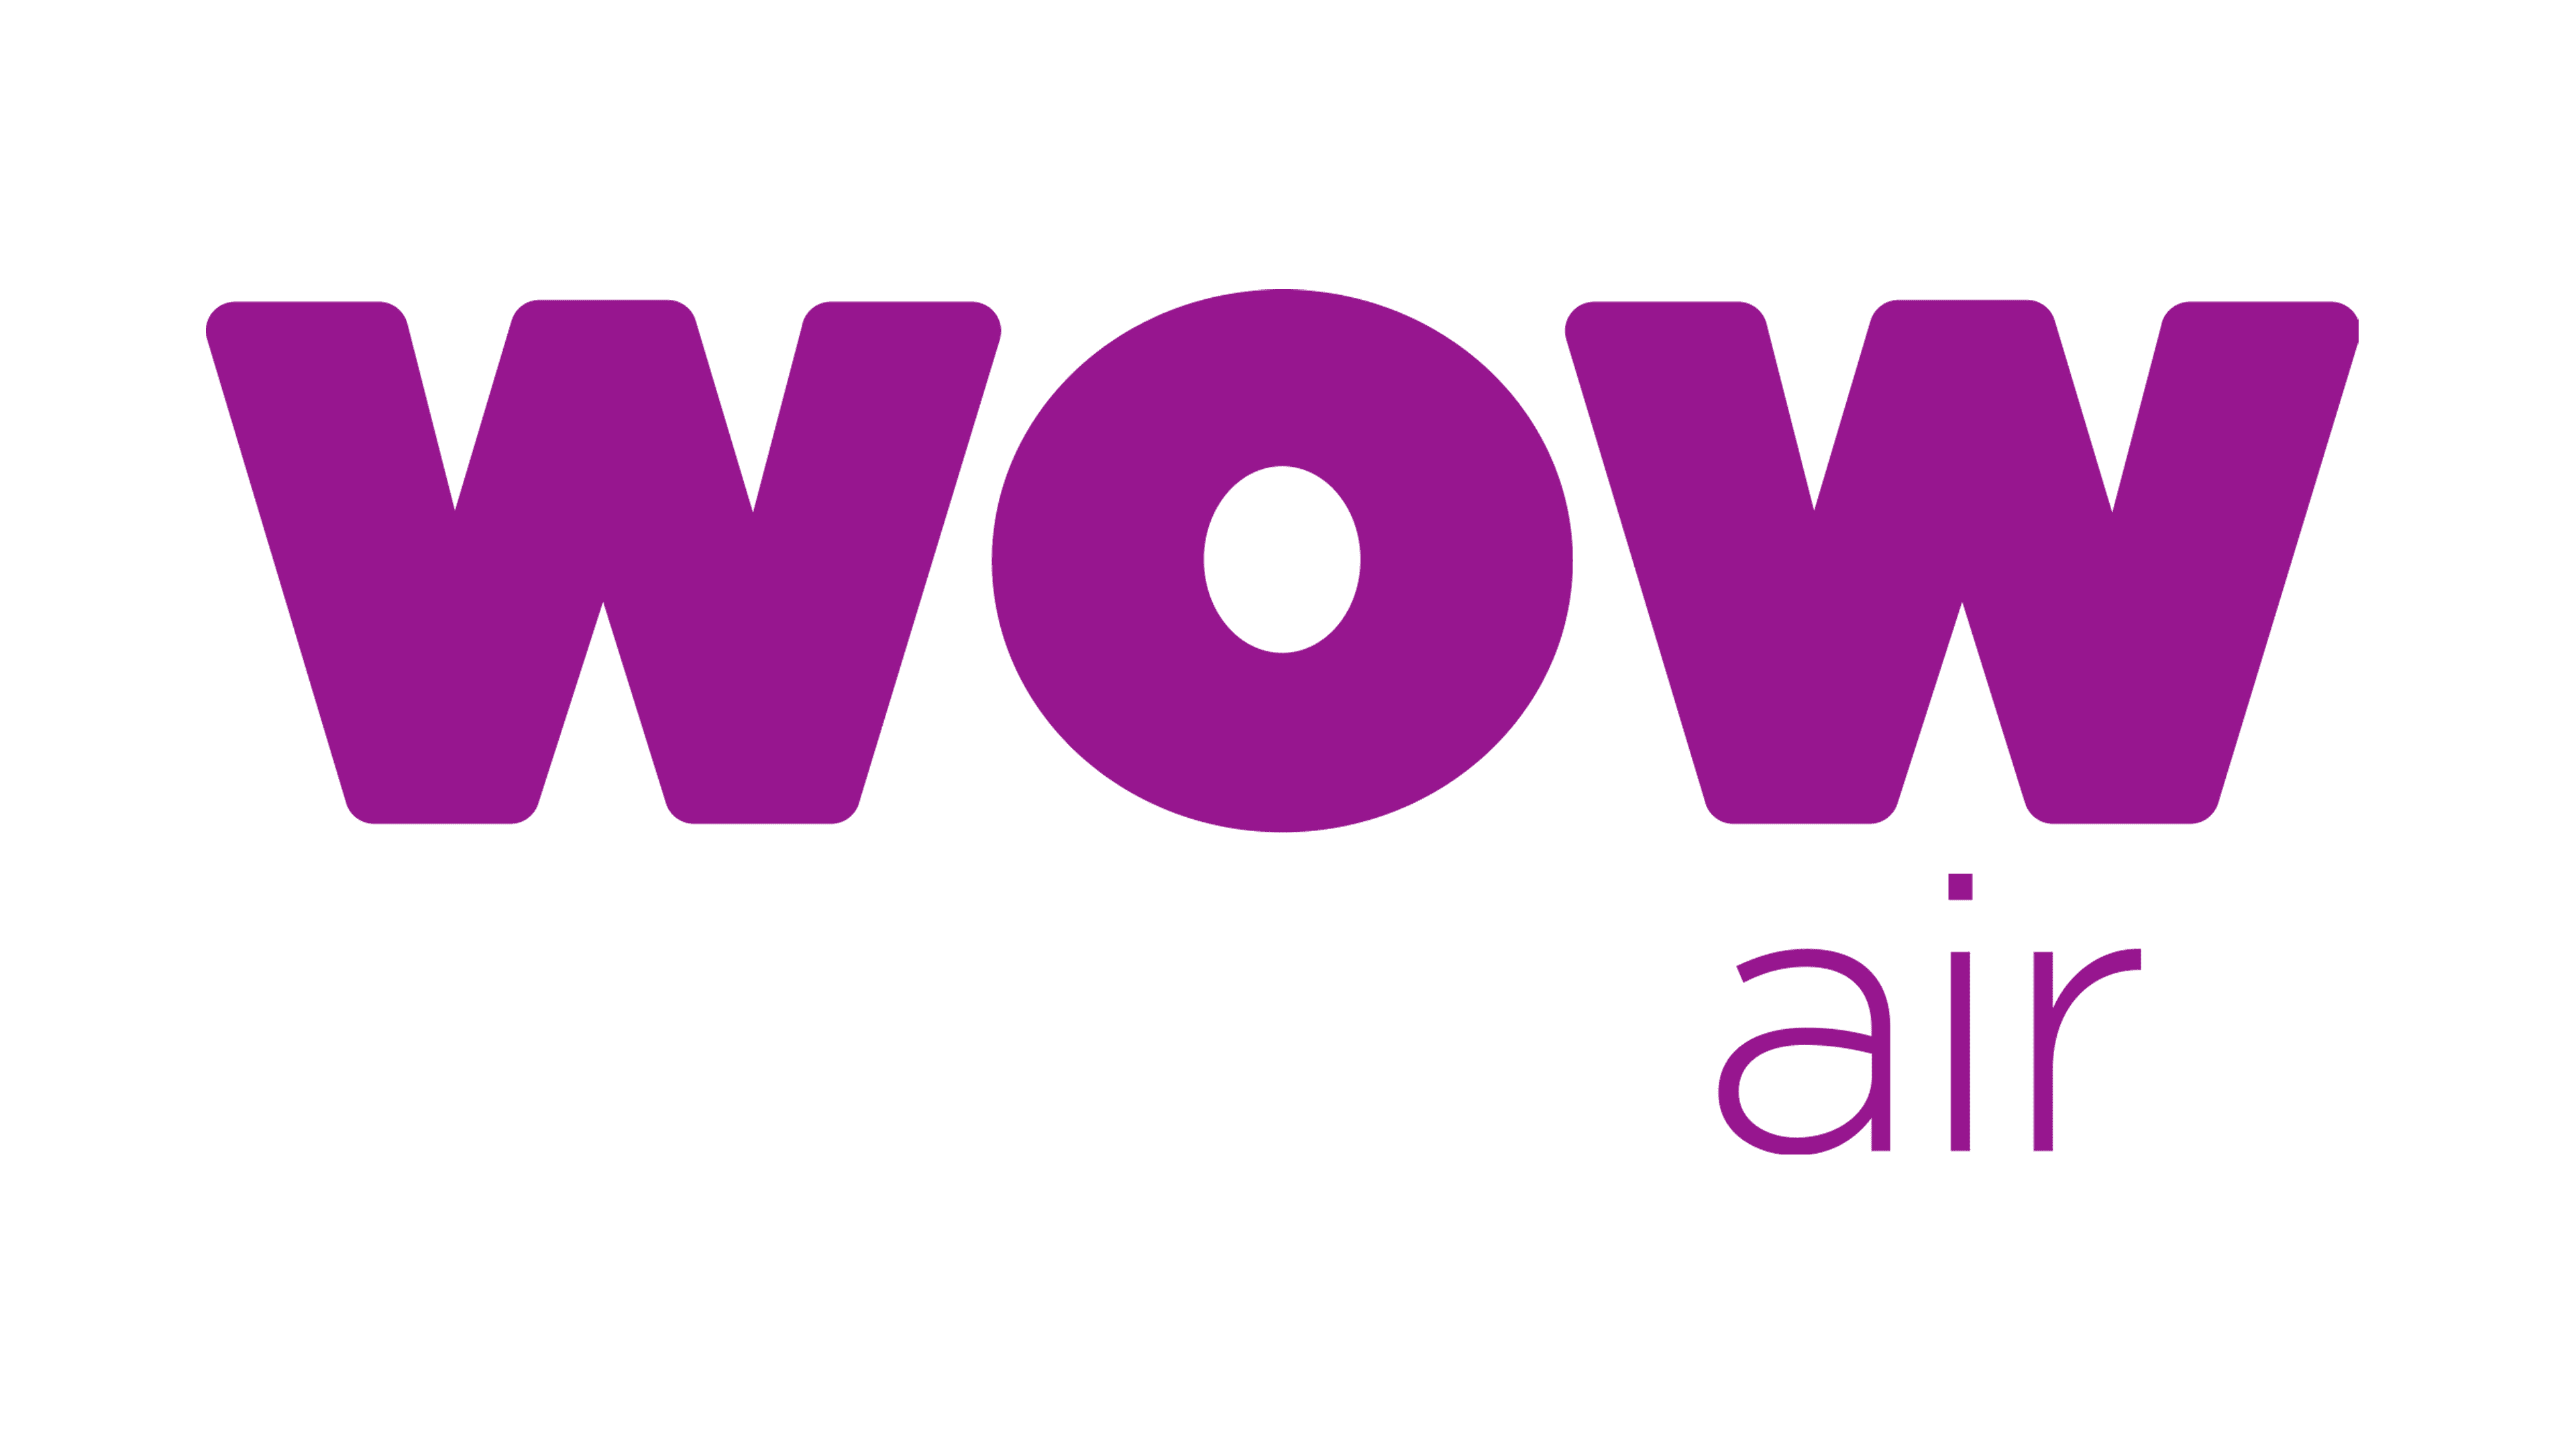 WOW air logo and symbol, meaning, history, PNG